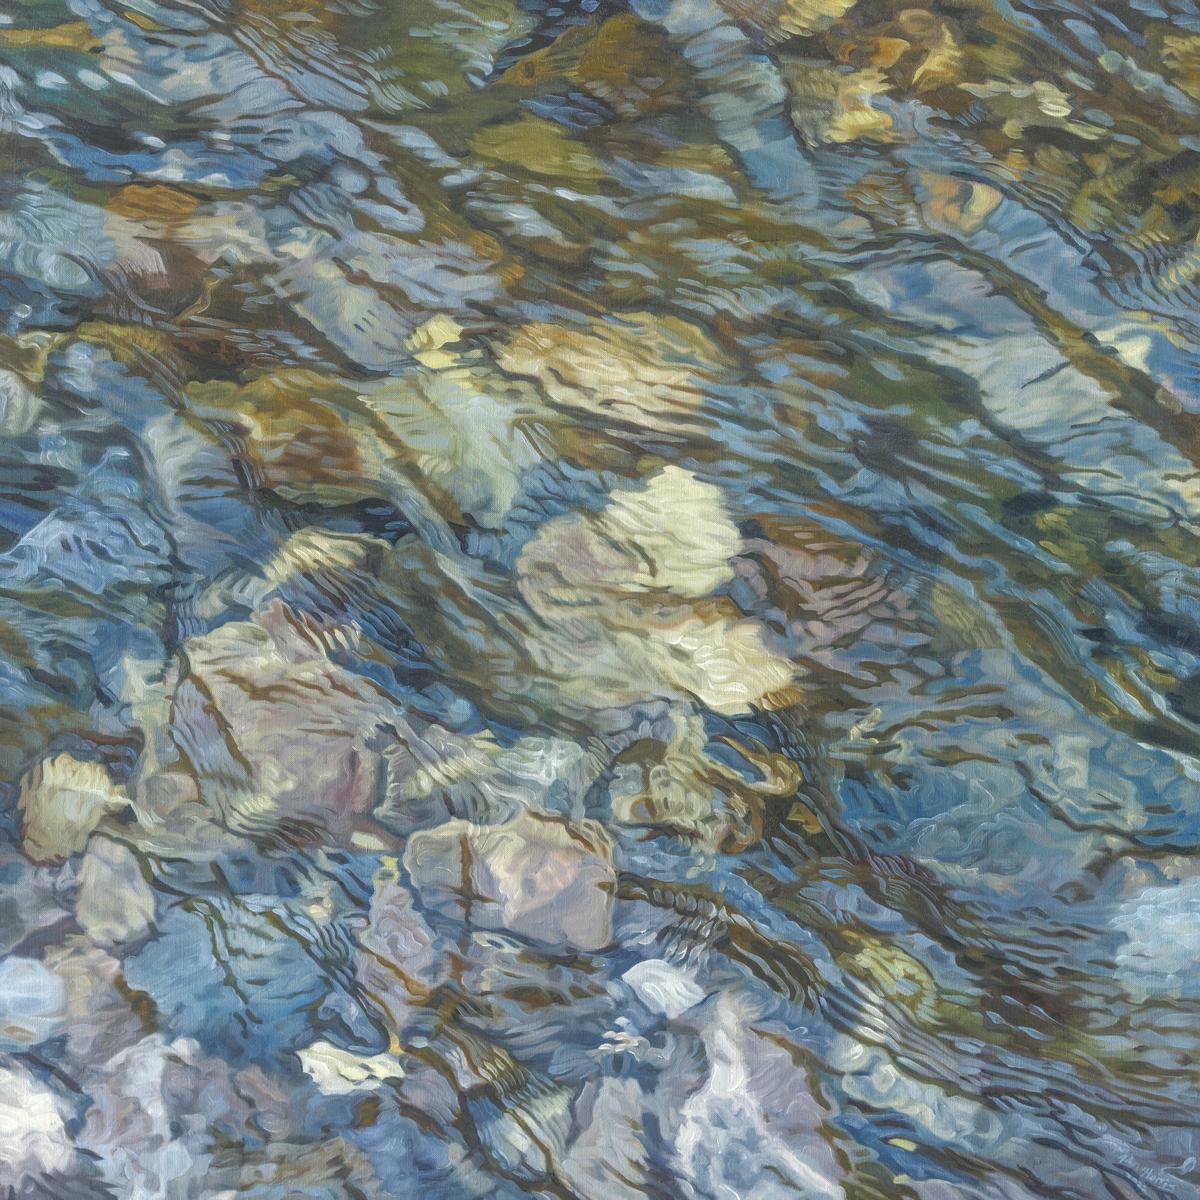 This realistic limited edition print by John Harris captures a close up view of water rippling over rocks in a riverbed. Natural light reflects off the surface of the water, enhancing the movement within the piece.

This Limited Edition giclee print